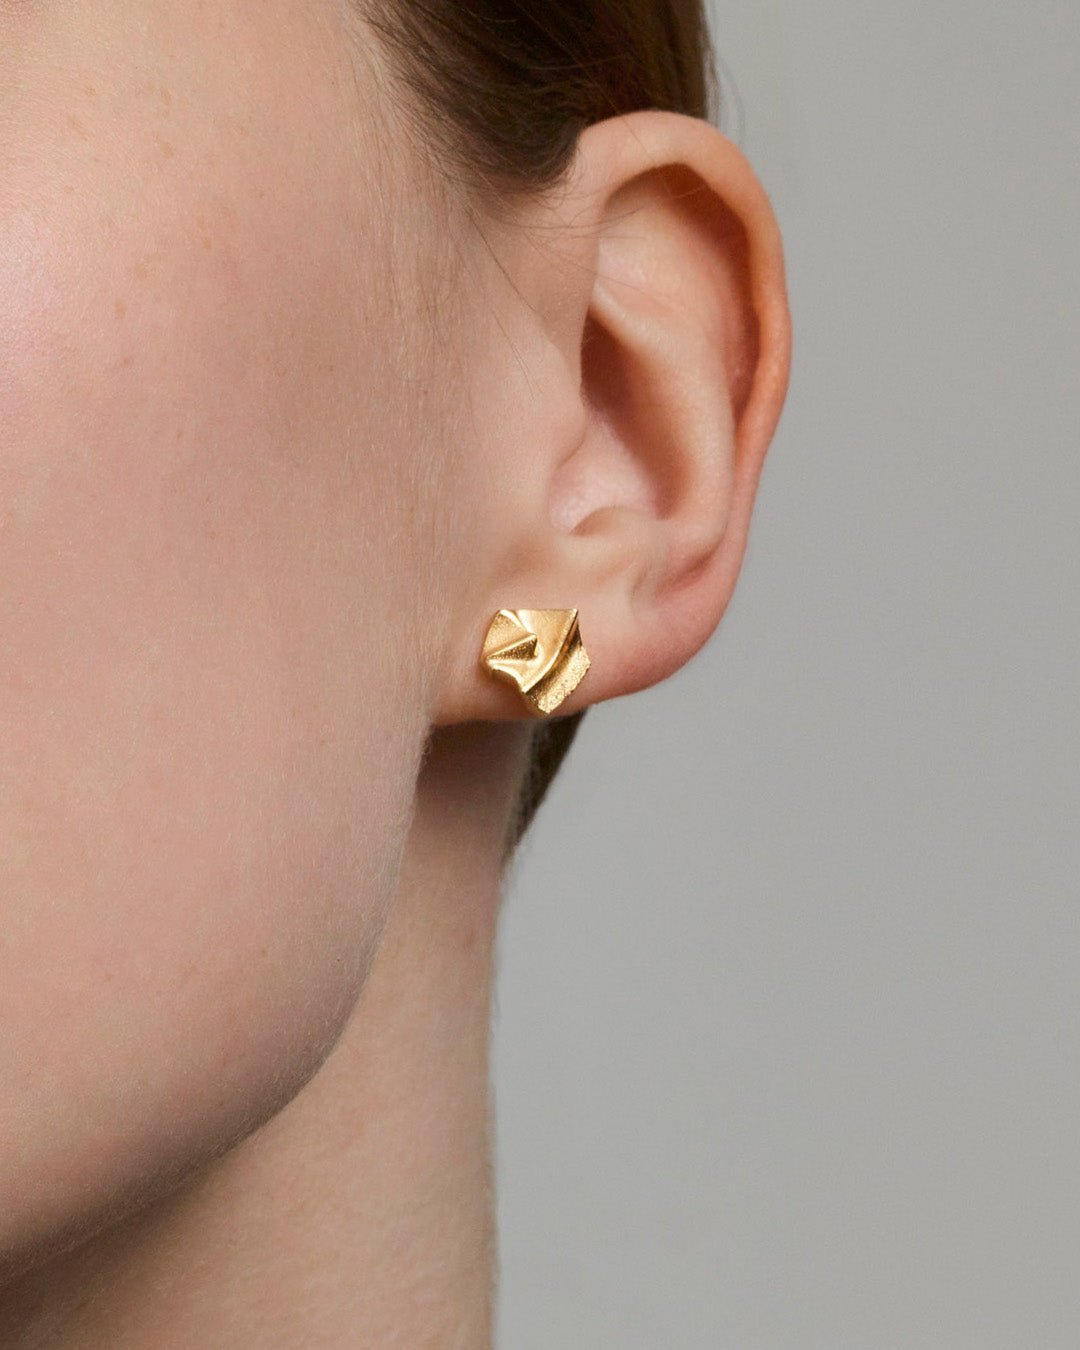 Paio earrings gold half pair right